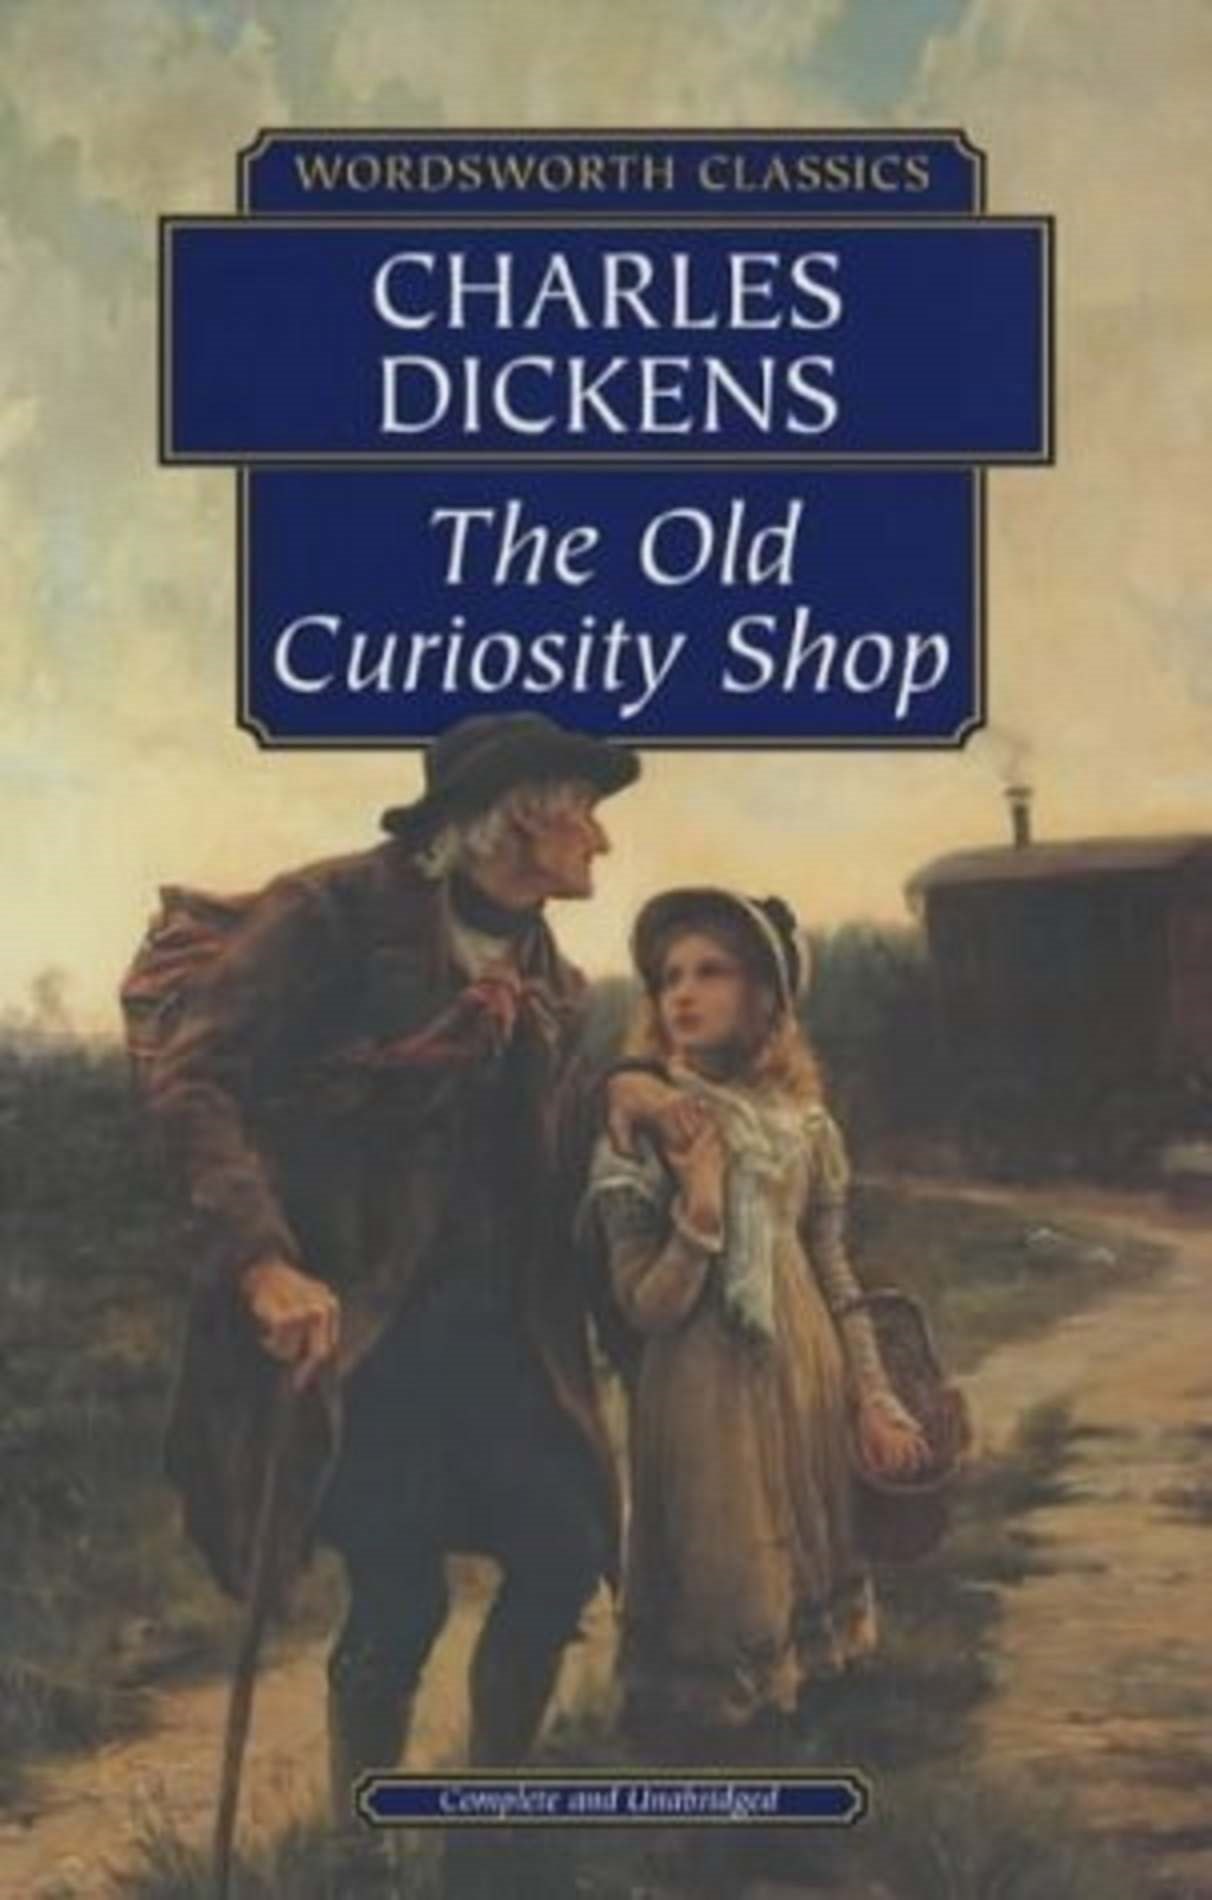 Charles Dickens – The Old Curiosity Shop